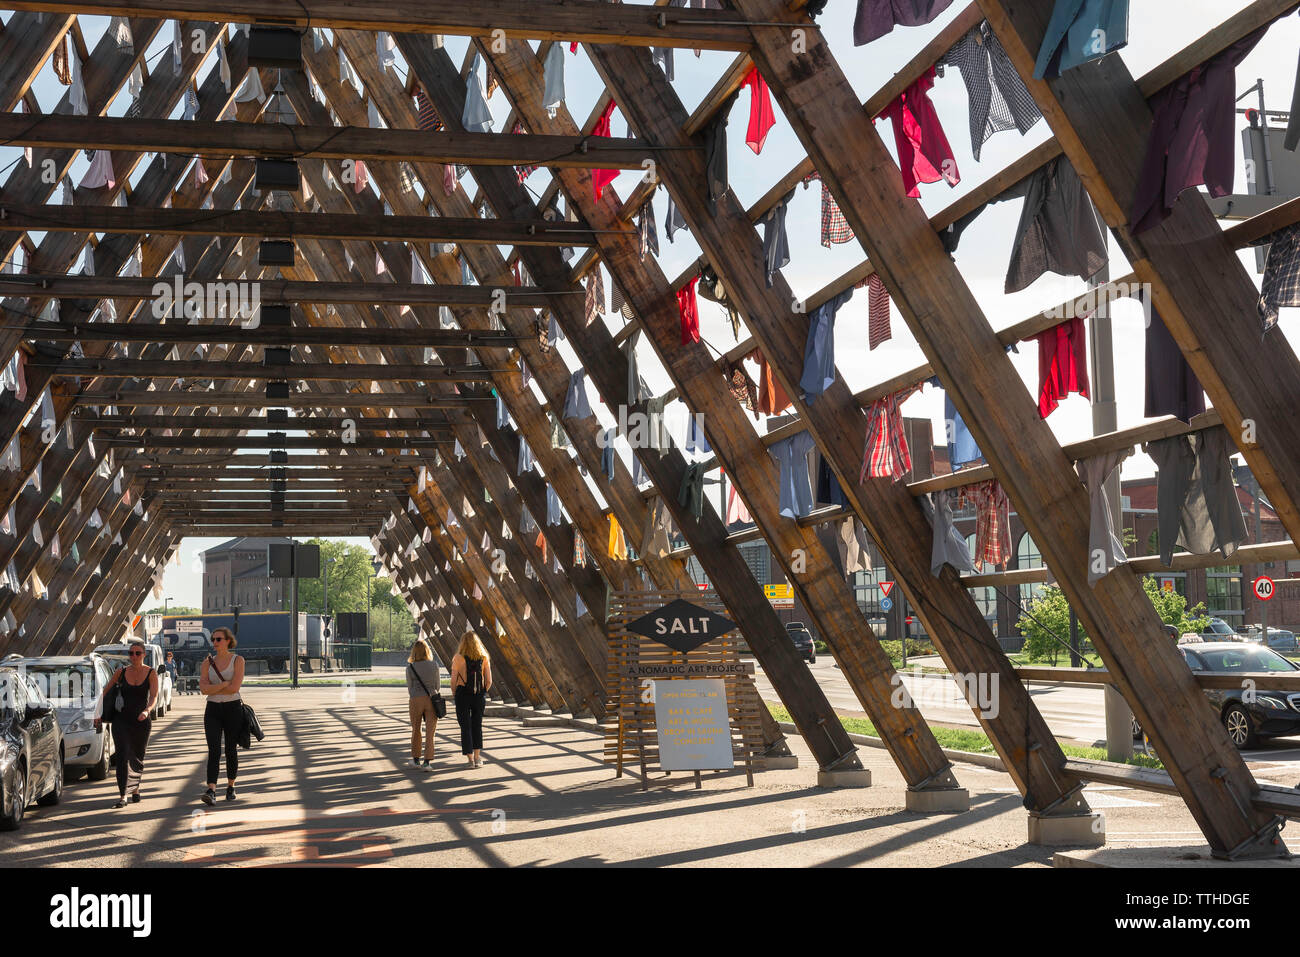 Oslo Norway, view of an art installation composed of hanging shirts on the site of the Salt Nomadic Art Project in the harbor area of Oslo, Norway. Stock Photo